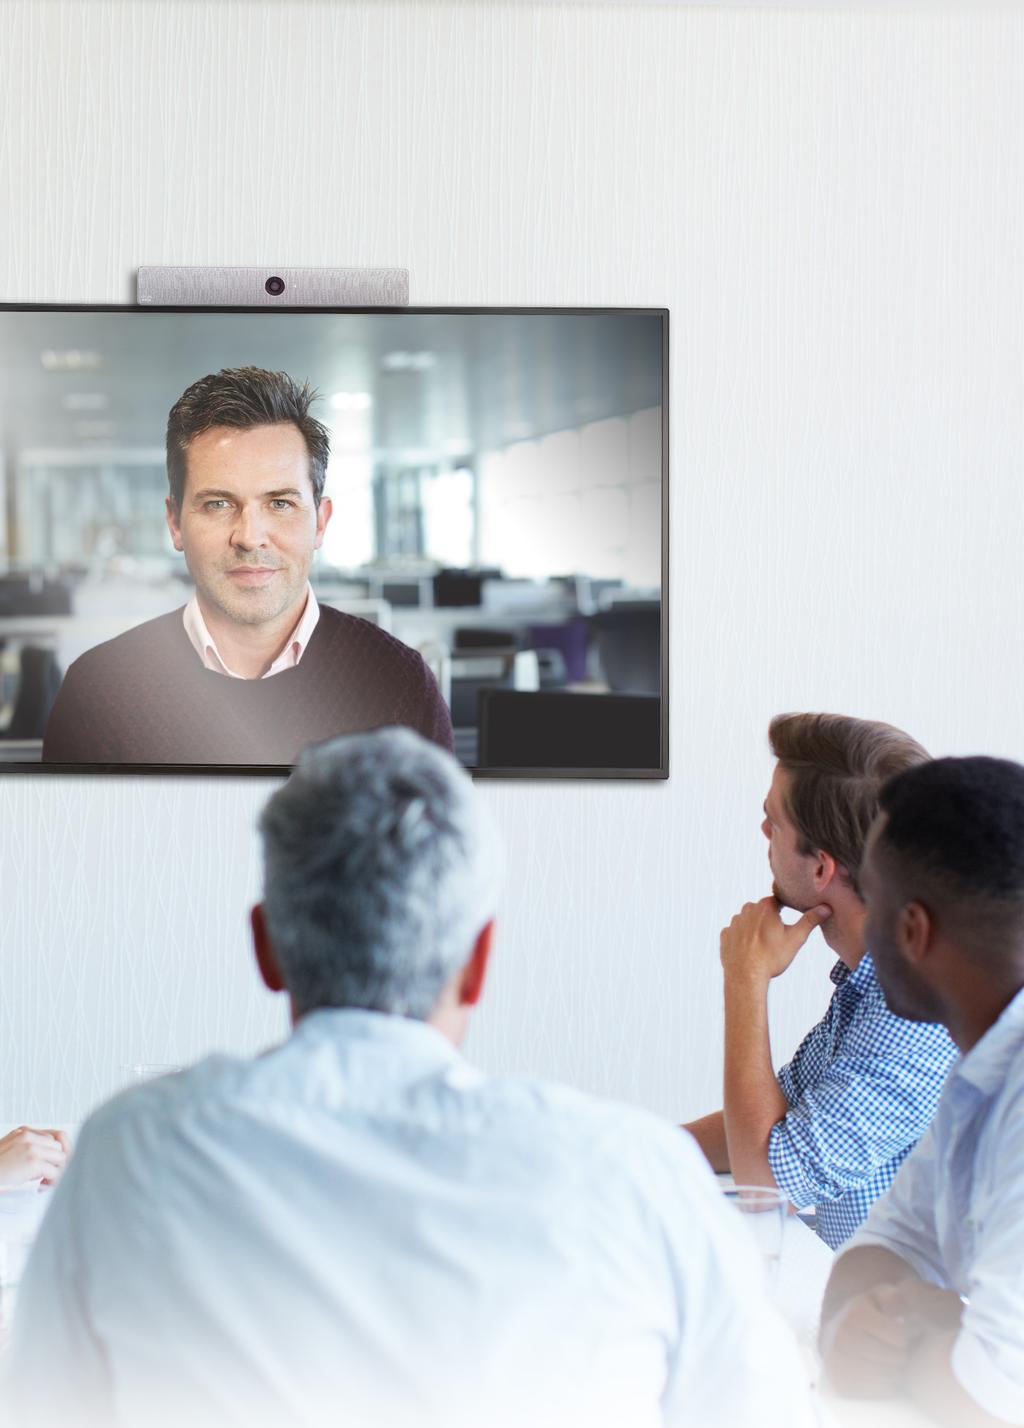 Video conferencing and